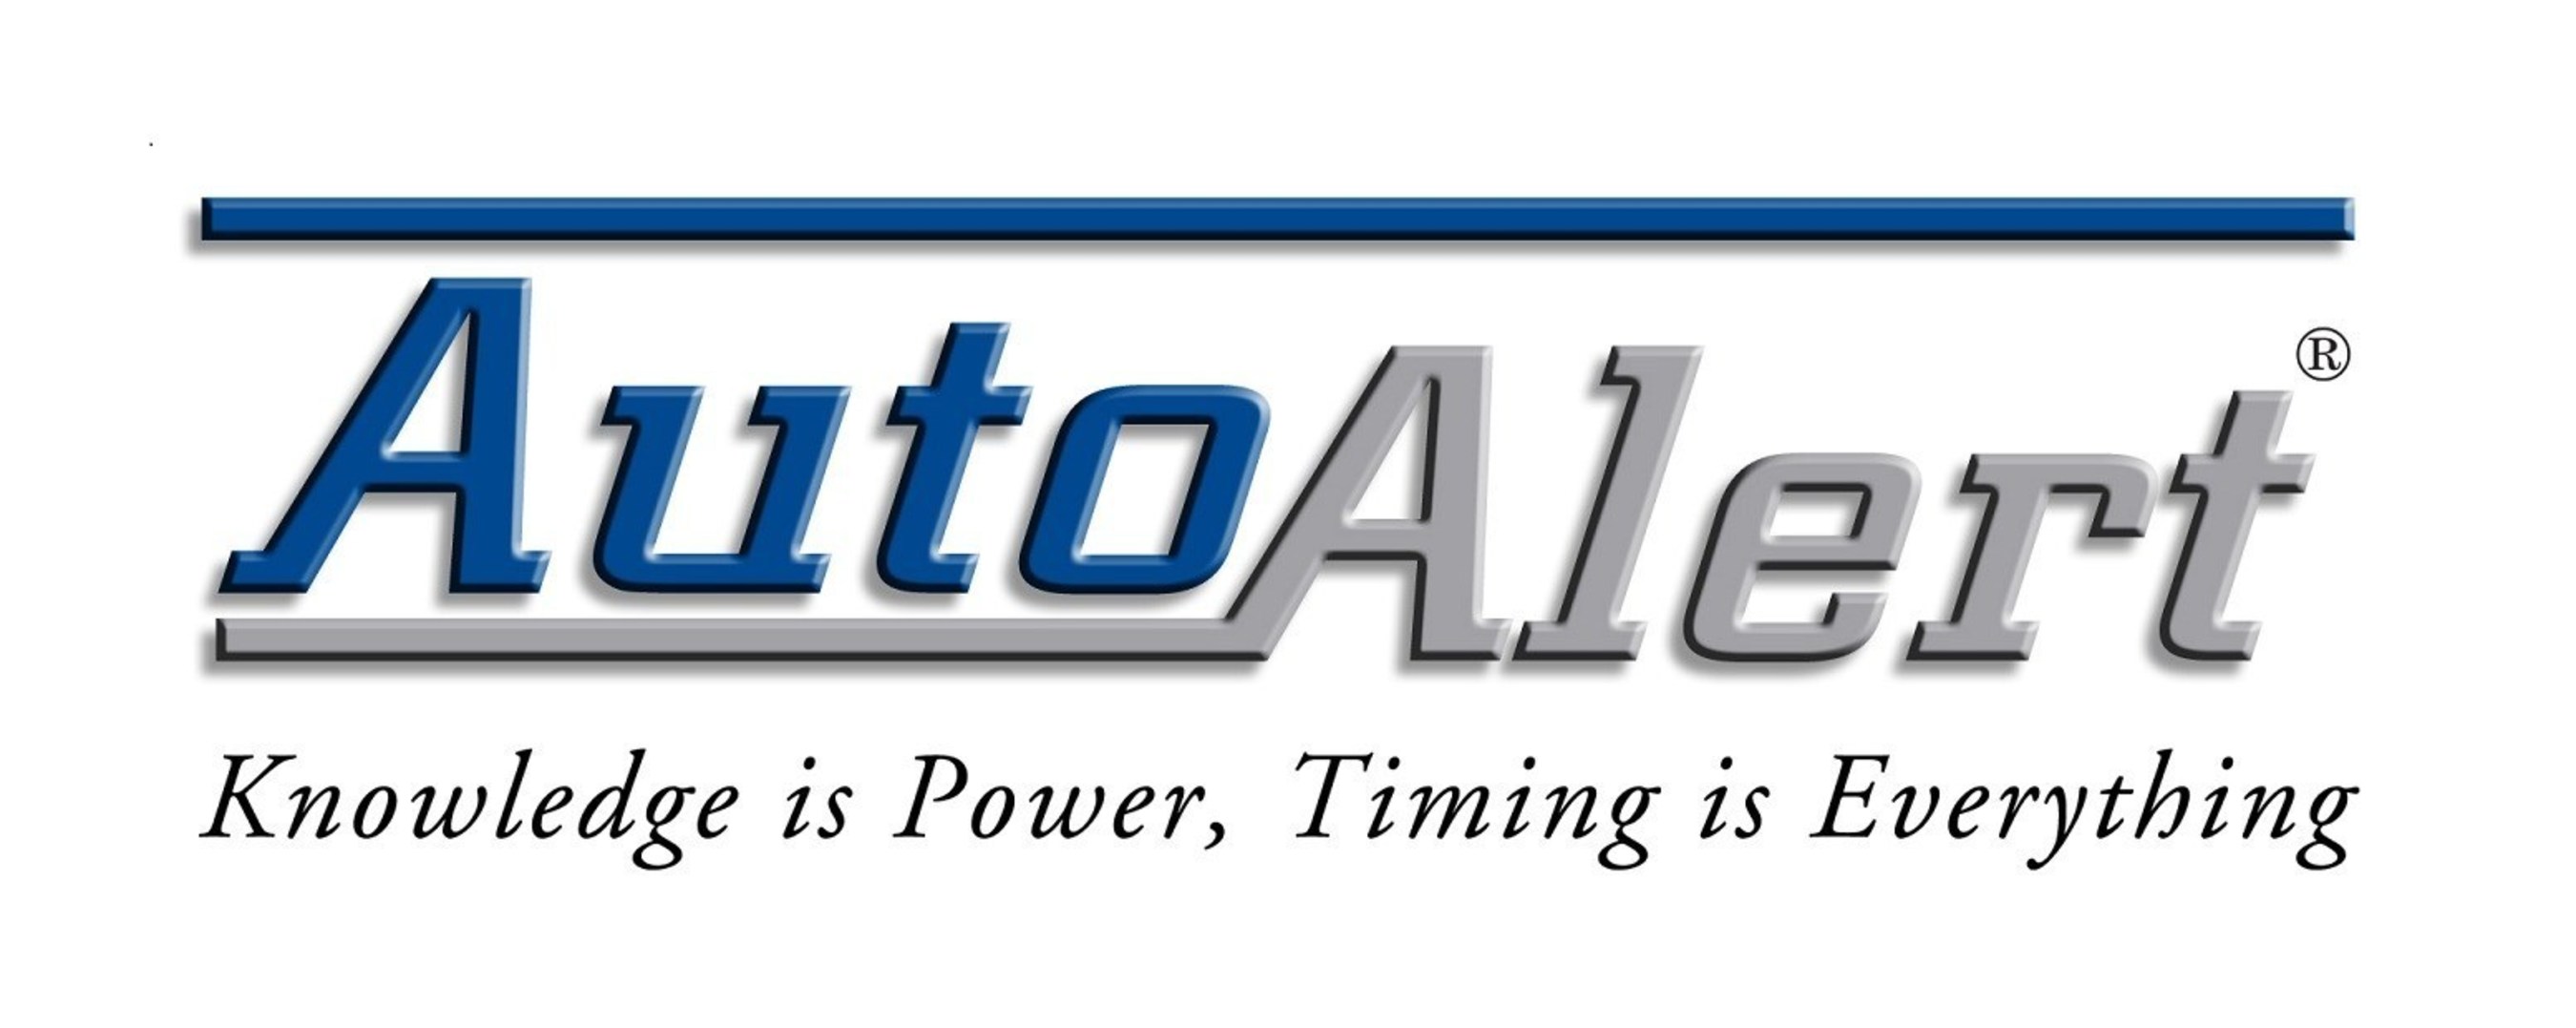 AutoAlert, Inc. is North America's premier data mining, lead generation and sales opportunity provider for auto dealerships.